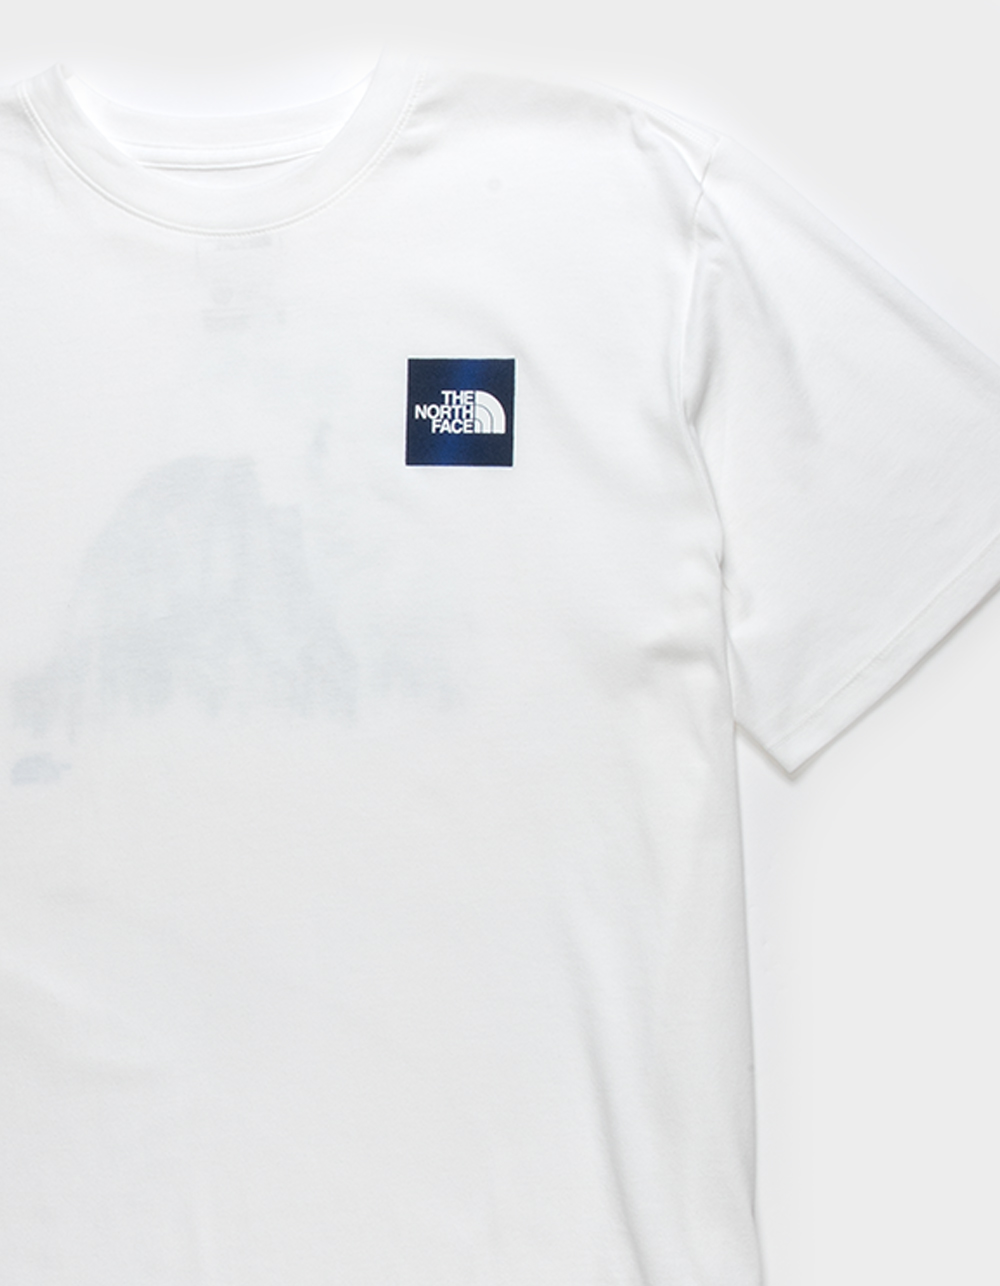 THE NORTH FACE Americana Mens Tee